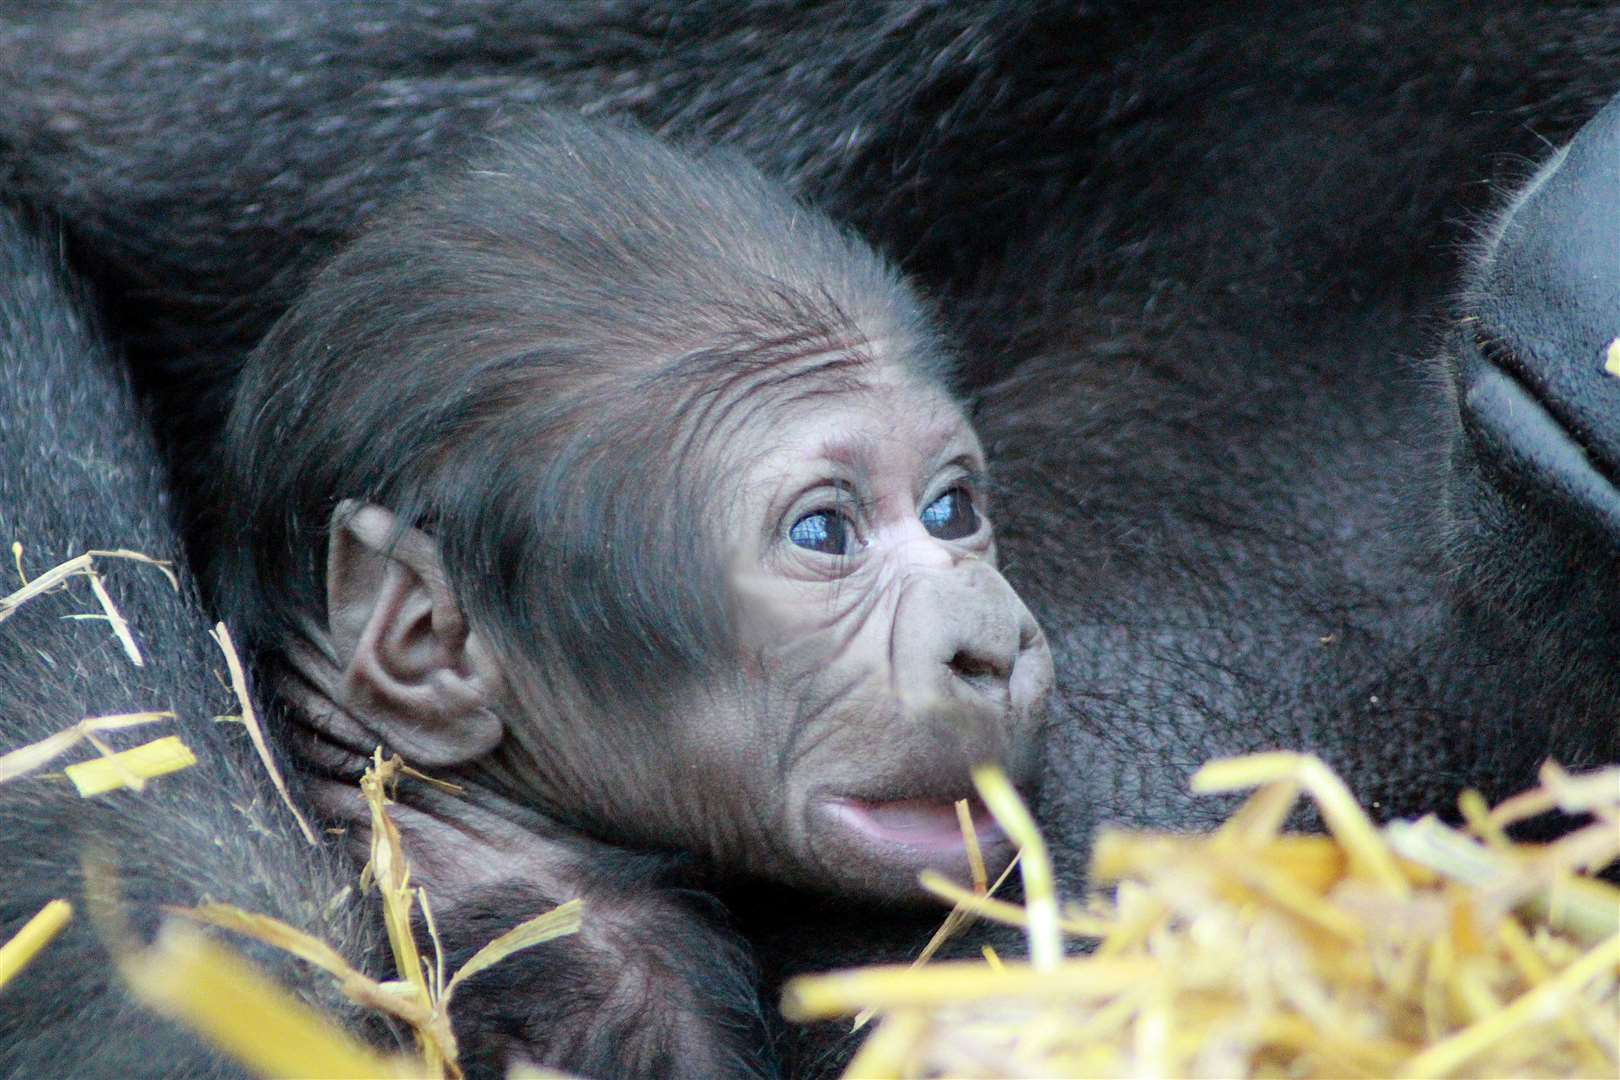 The baby is the 147th to be born at the reserve. Photo credit: Leanne Smith